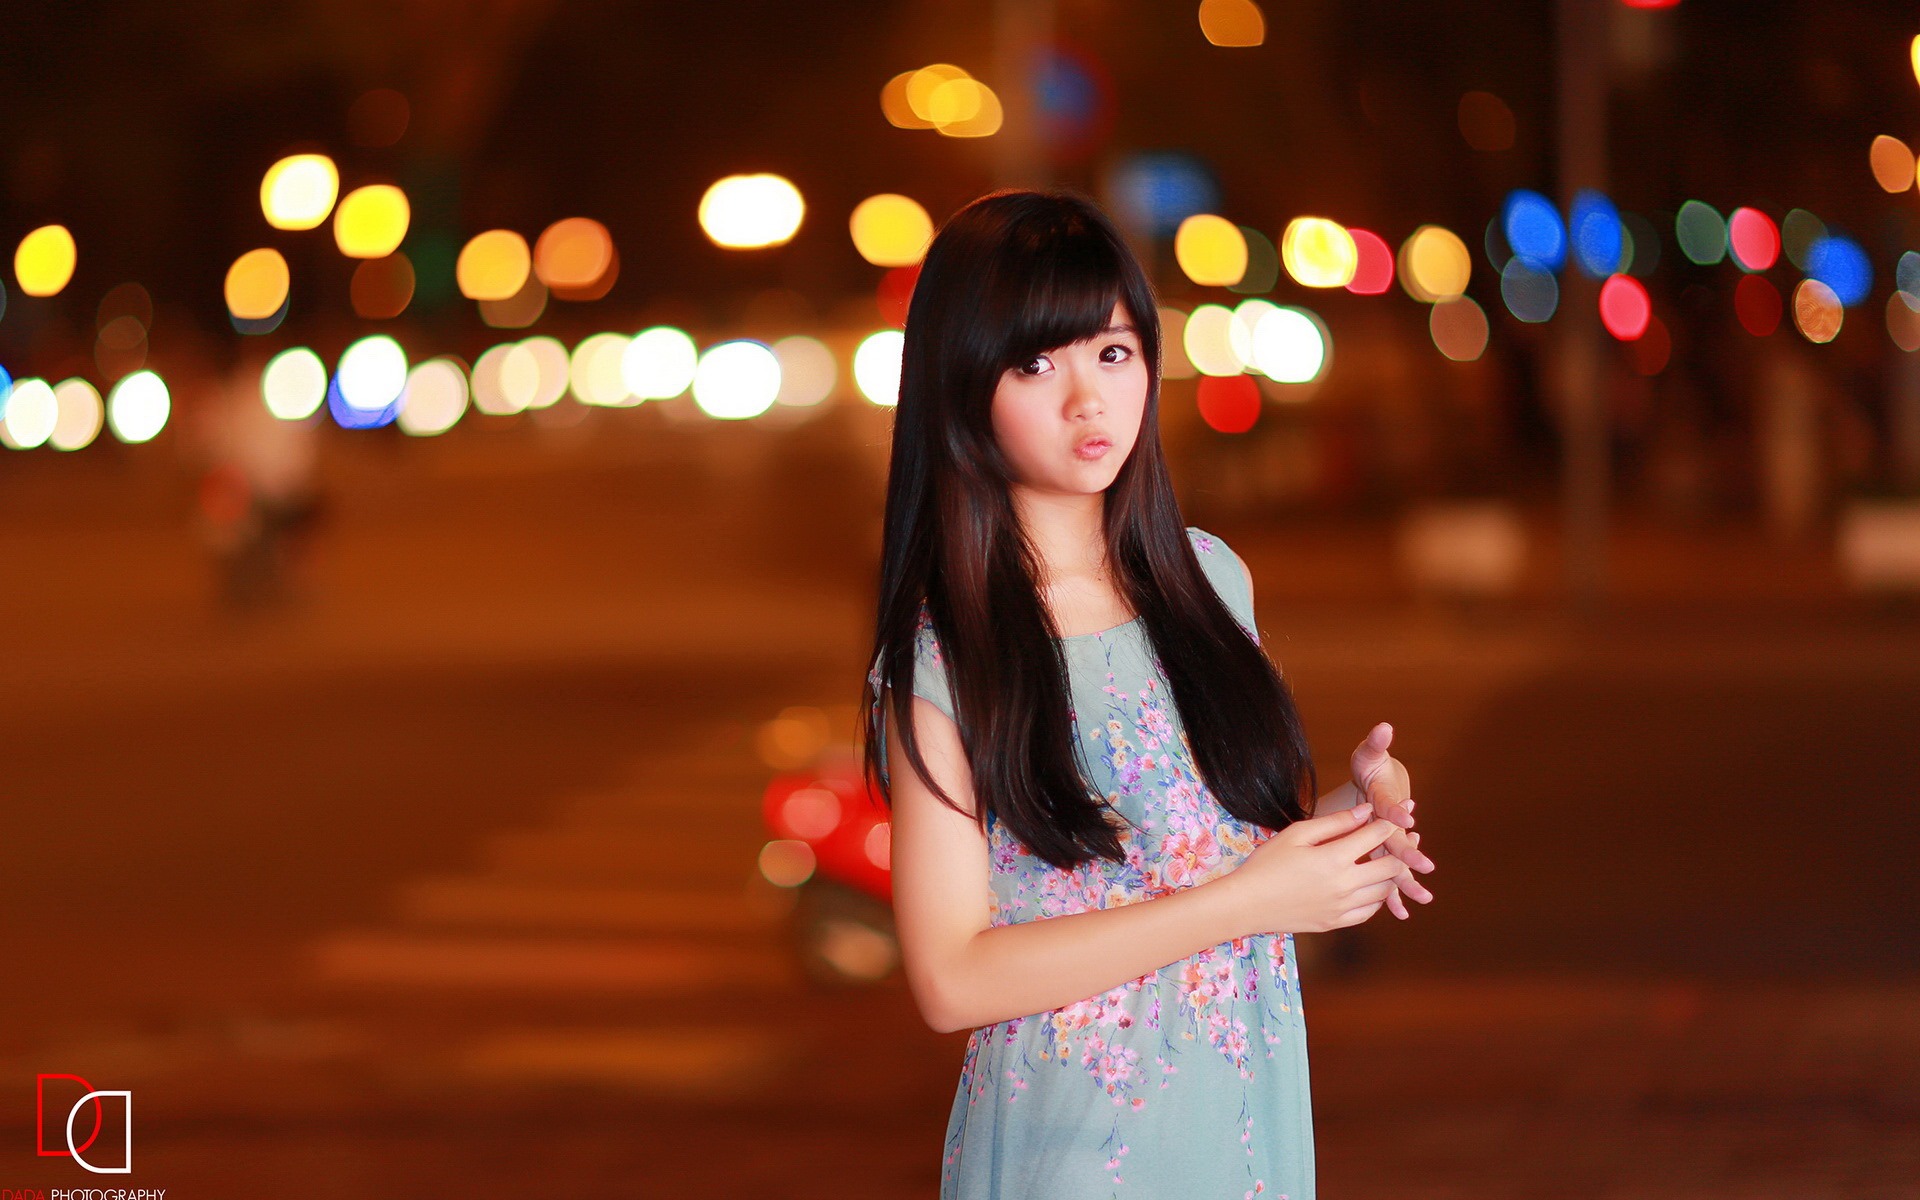 Pure and lovely young Asian girl HD wallpapers collection (3) #27 - 1920x1200